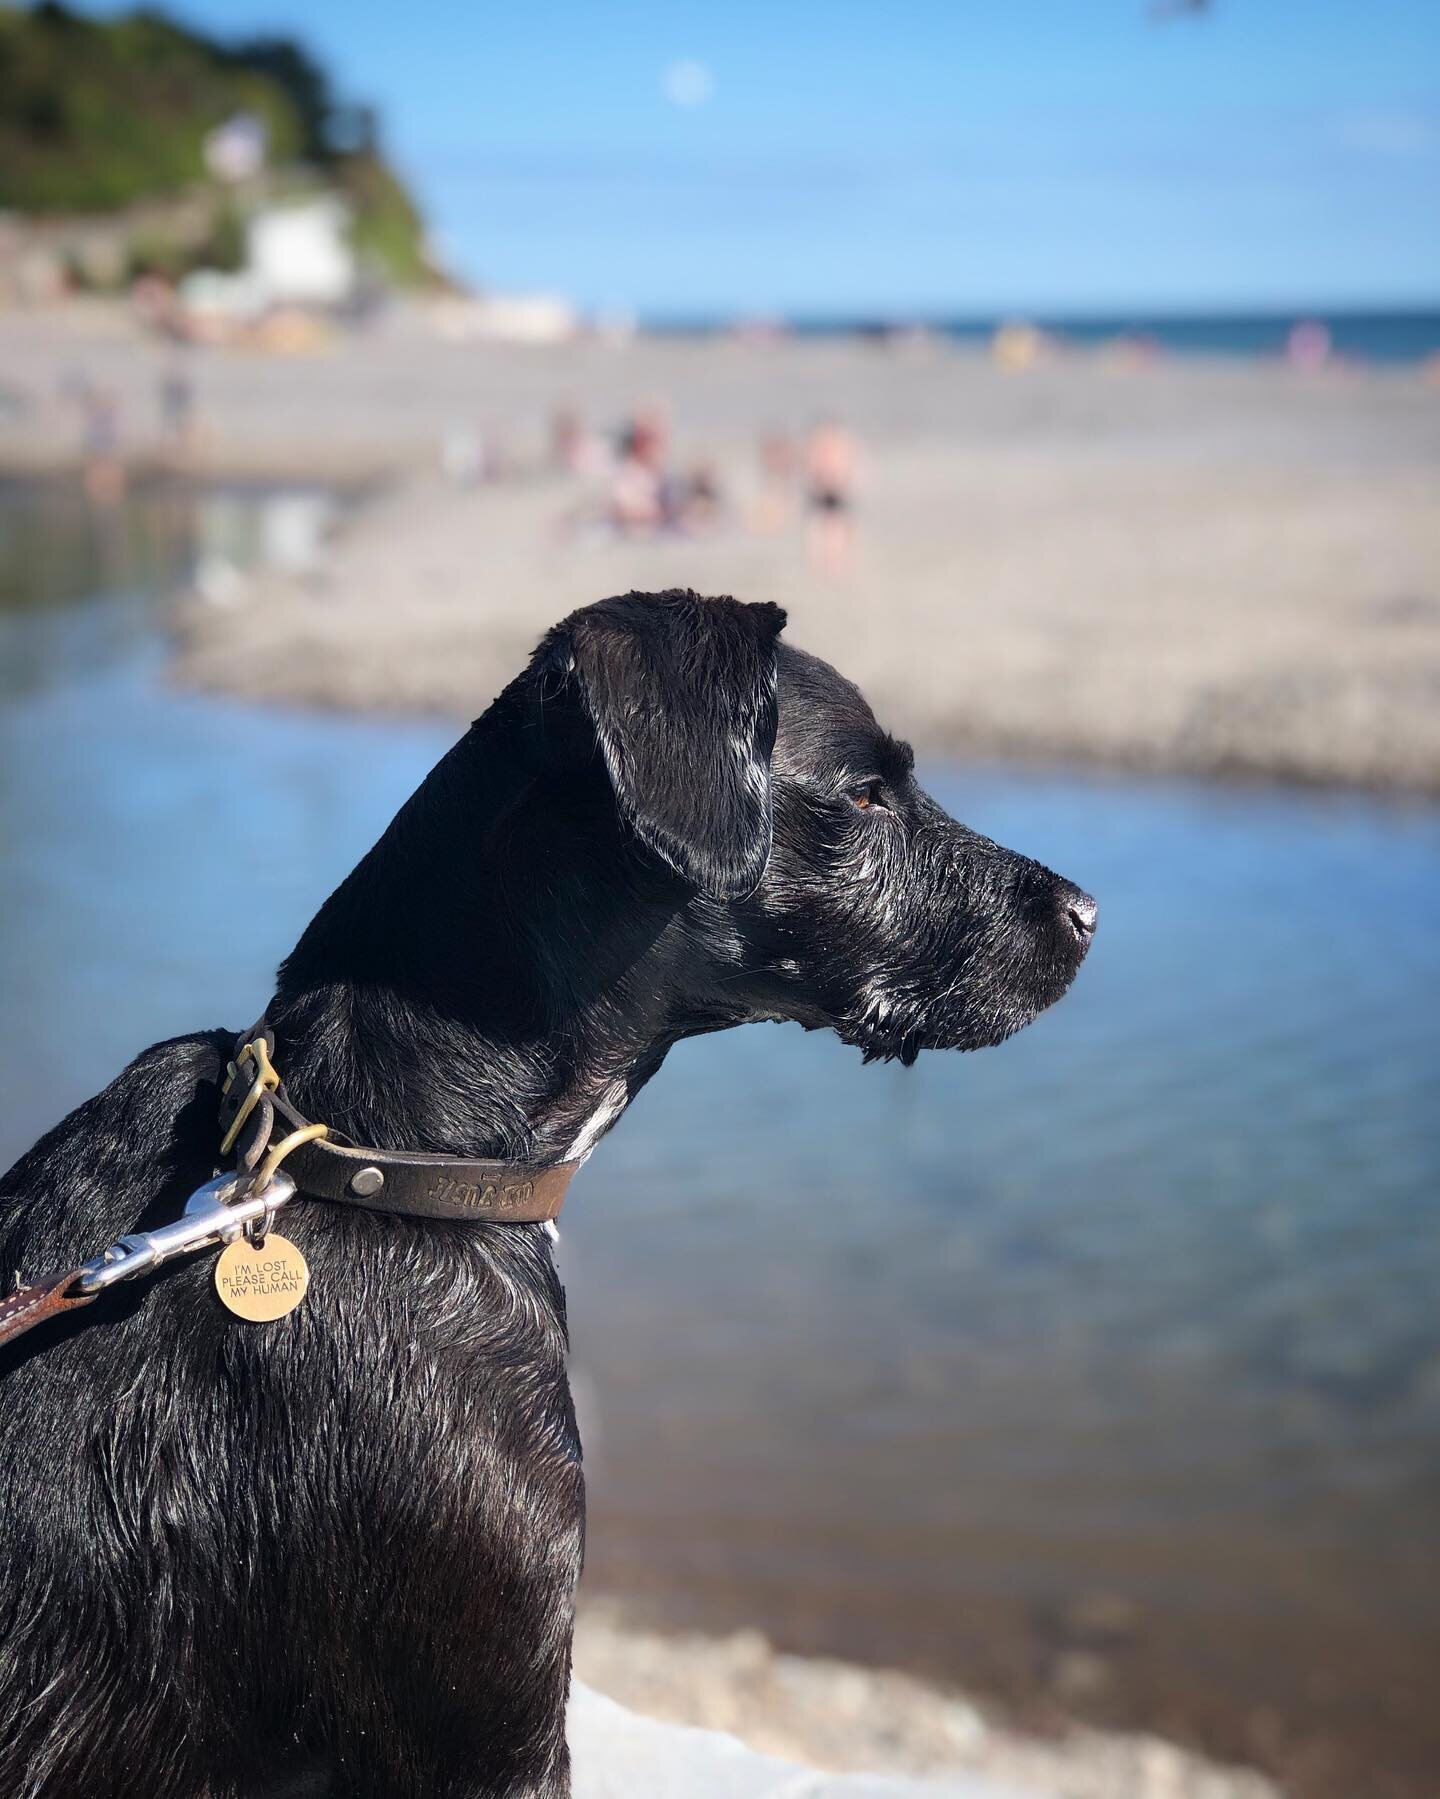 A holiday at last! First day and Bernard is already &ldquo;looking for trouble&rdquo;. 🤣🐶💙 #dog #Cornwall #holiday #sea #doglover #dogtreats #ball #seaweed #beachholiday #ukholiday #cornwallcoast